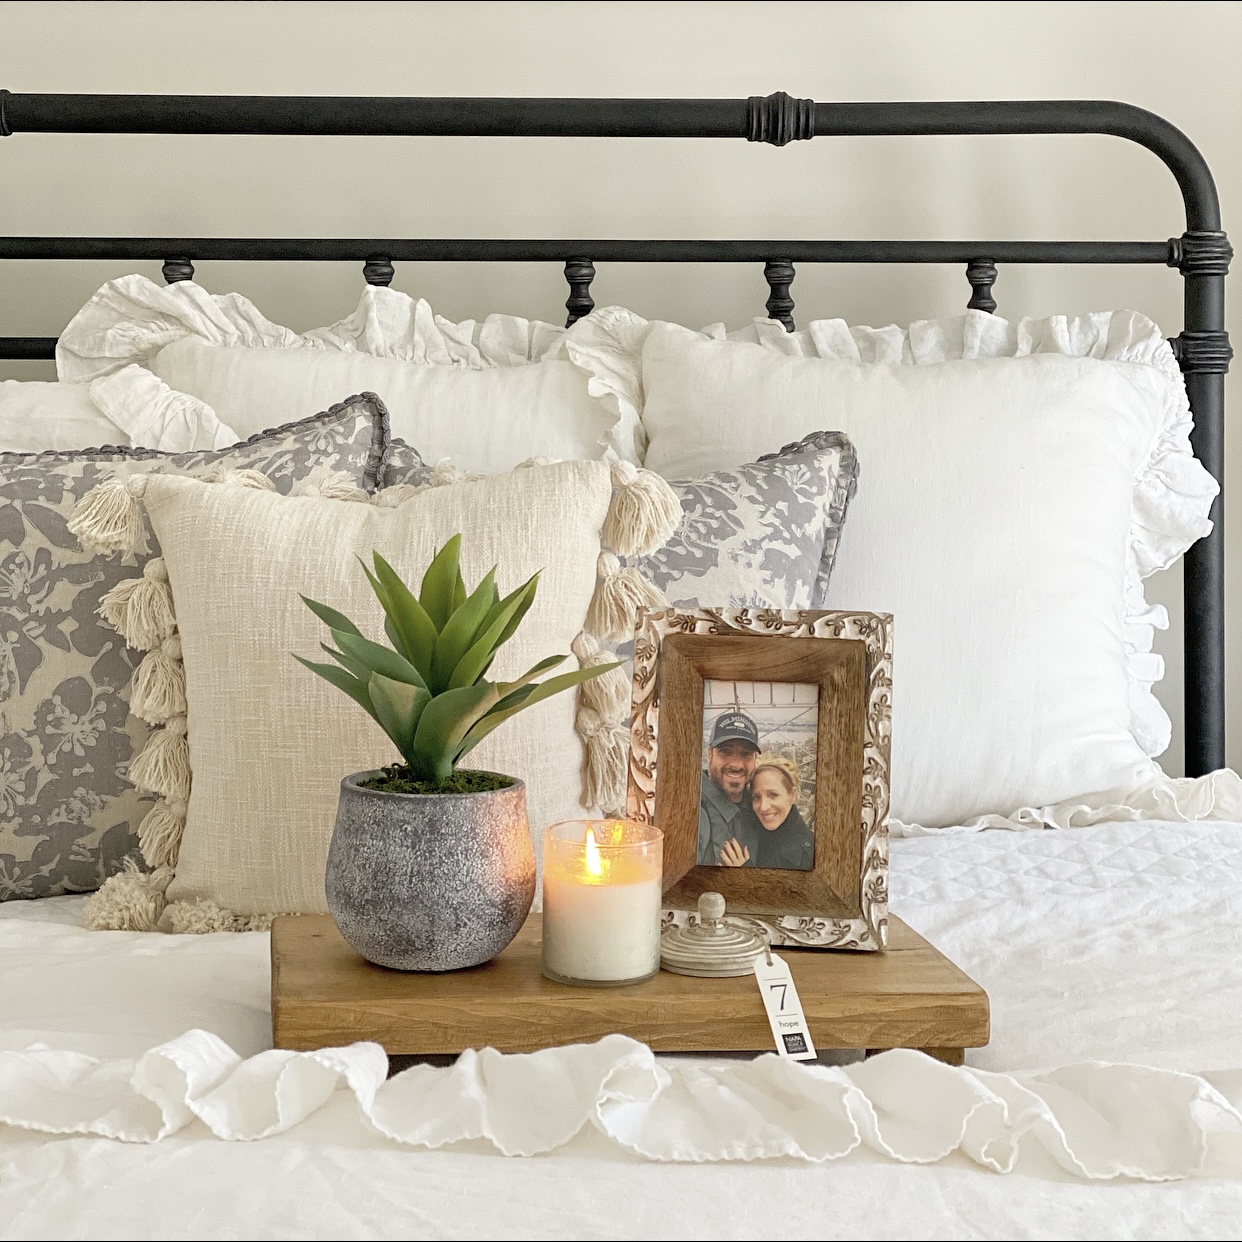 Bedside essentials: faux plant, candle, and picture frame arranged on a tray on the bed.